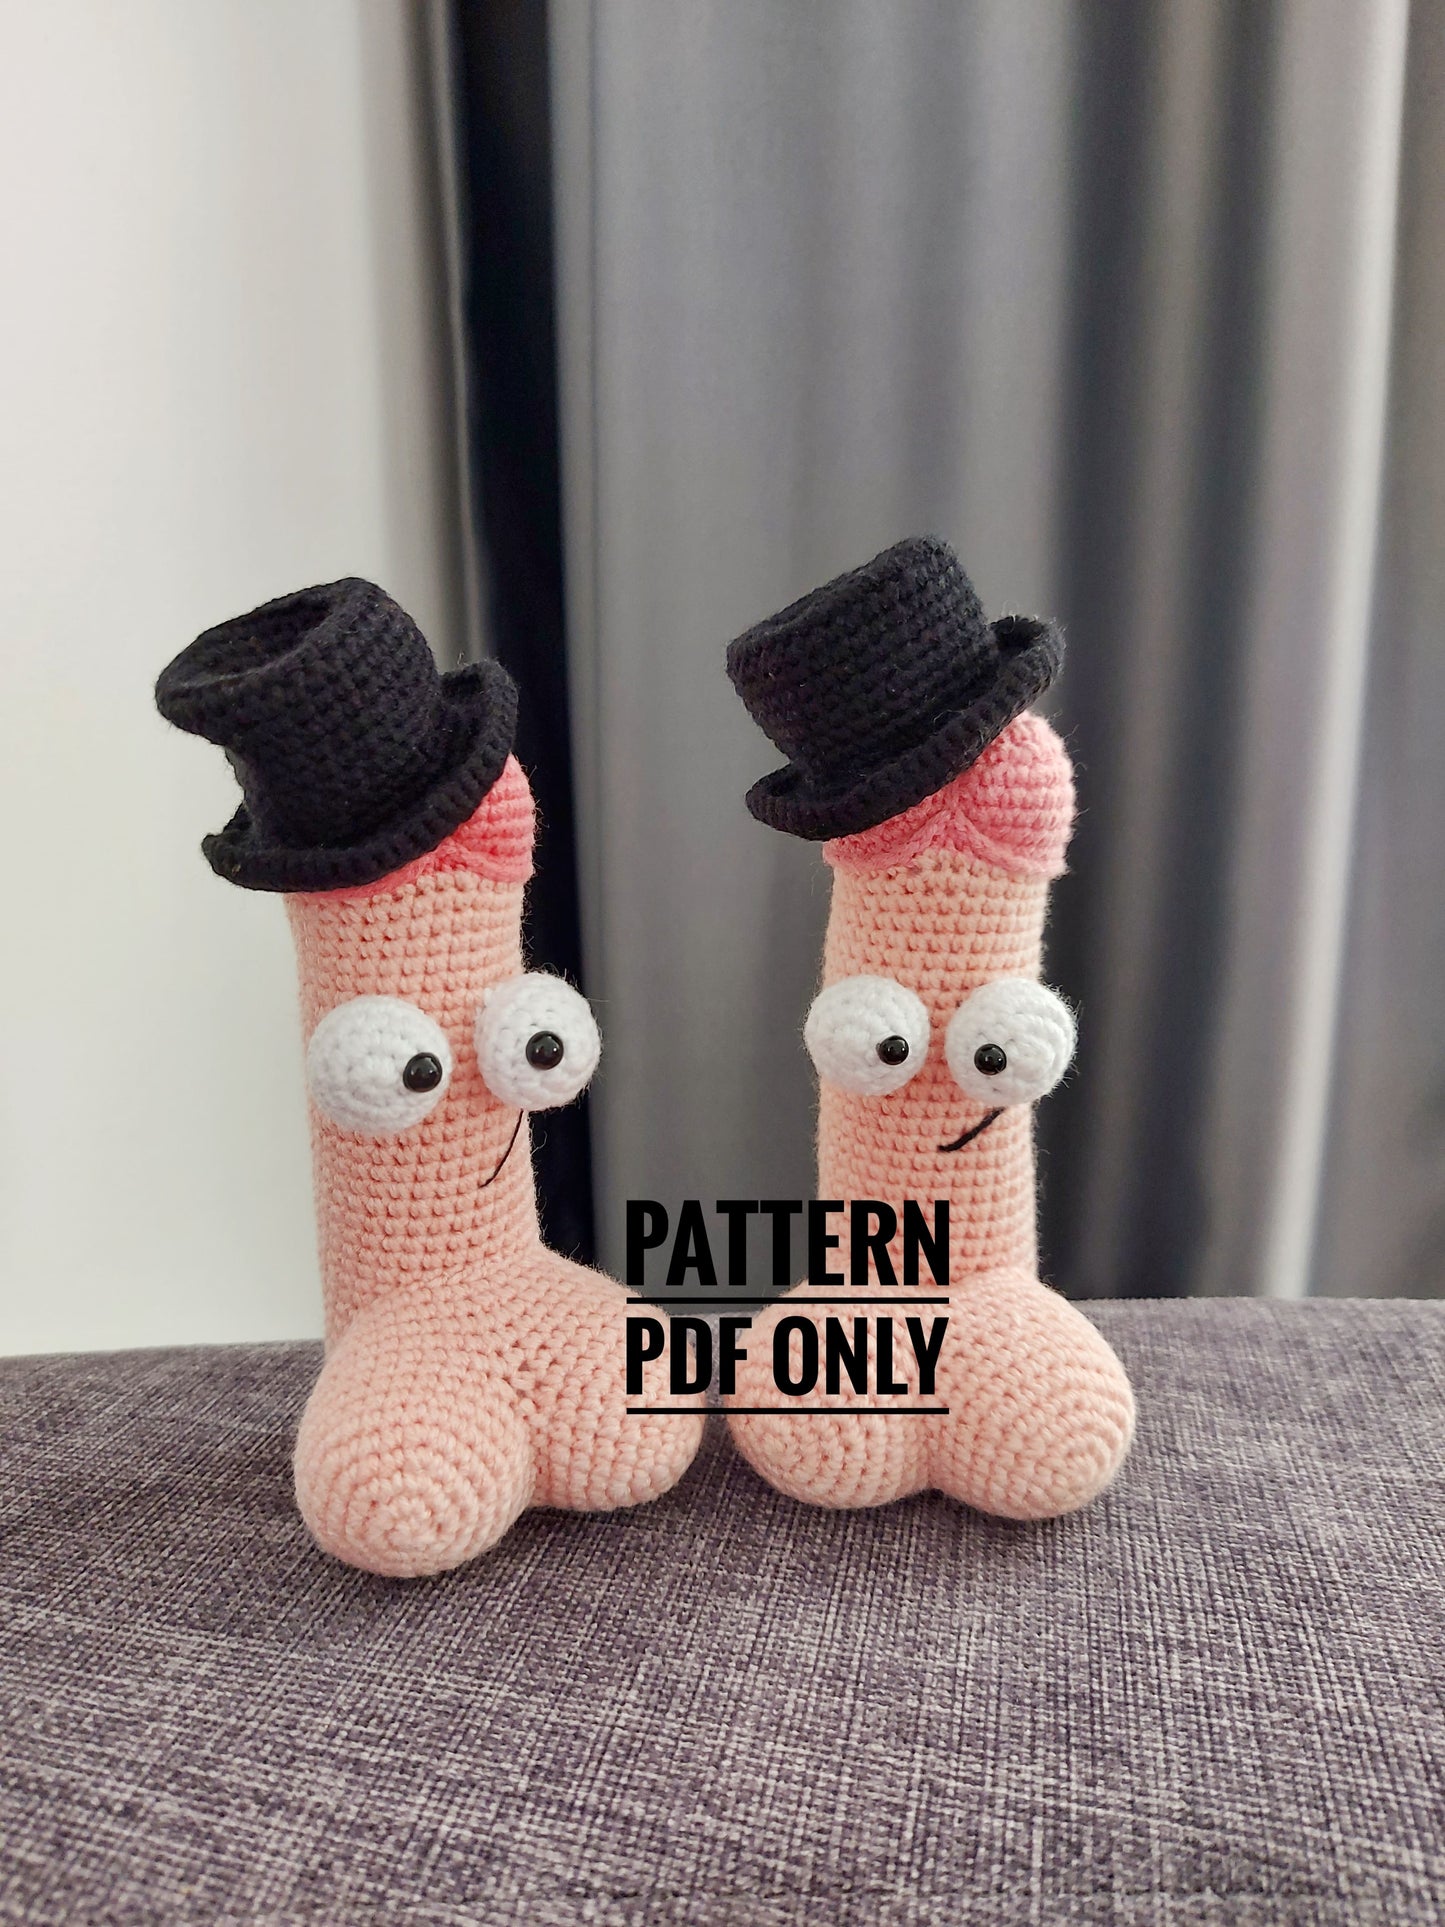 Crochet penis toy pattern, Amigurumi pattern for beginner, Crochet penis Pdf photo tutorial, Funny mature gift for her